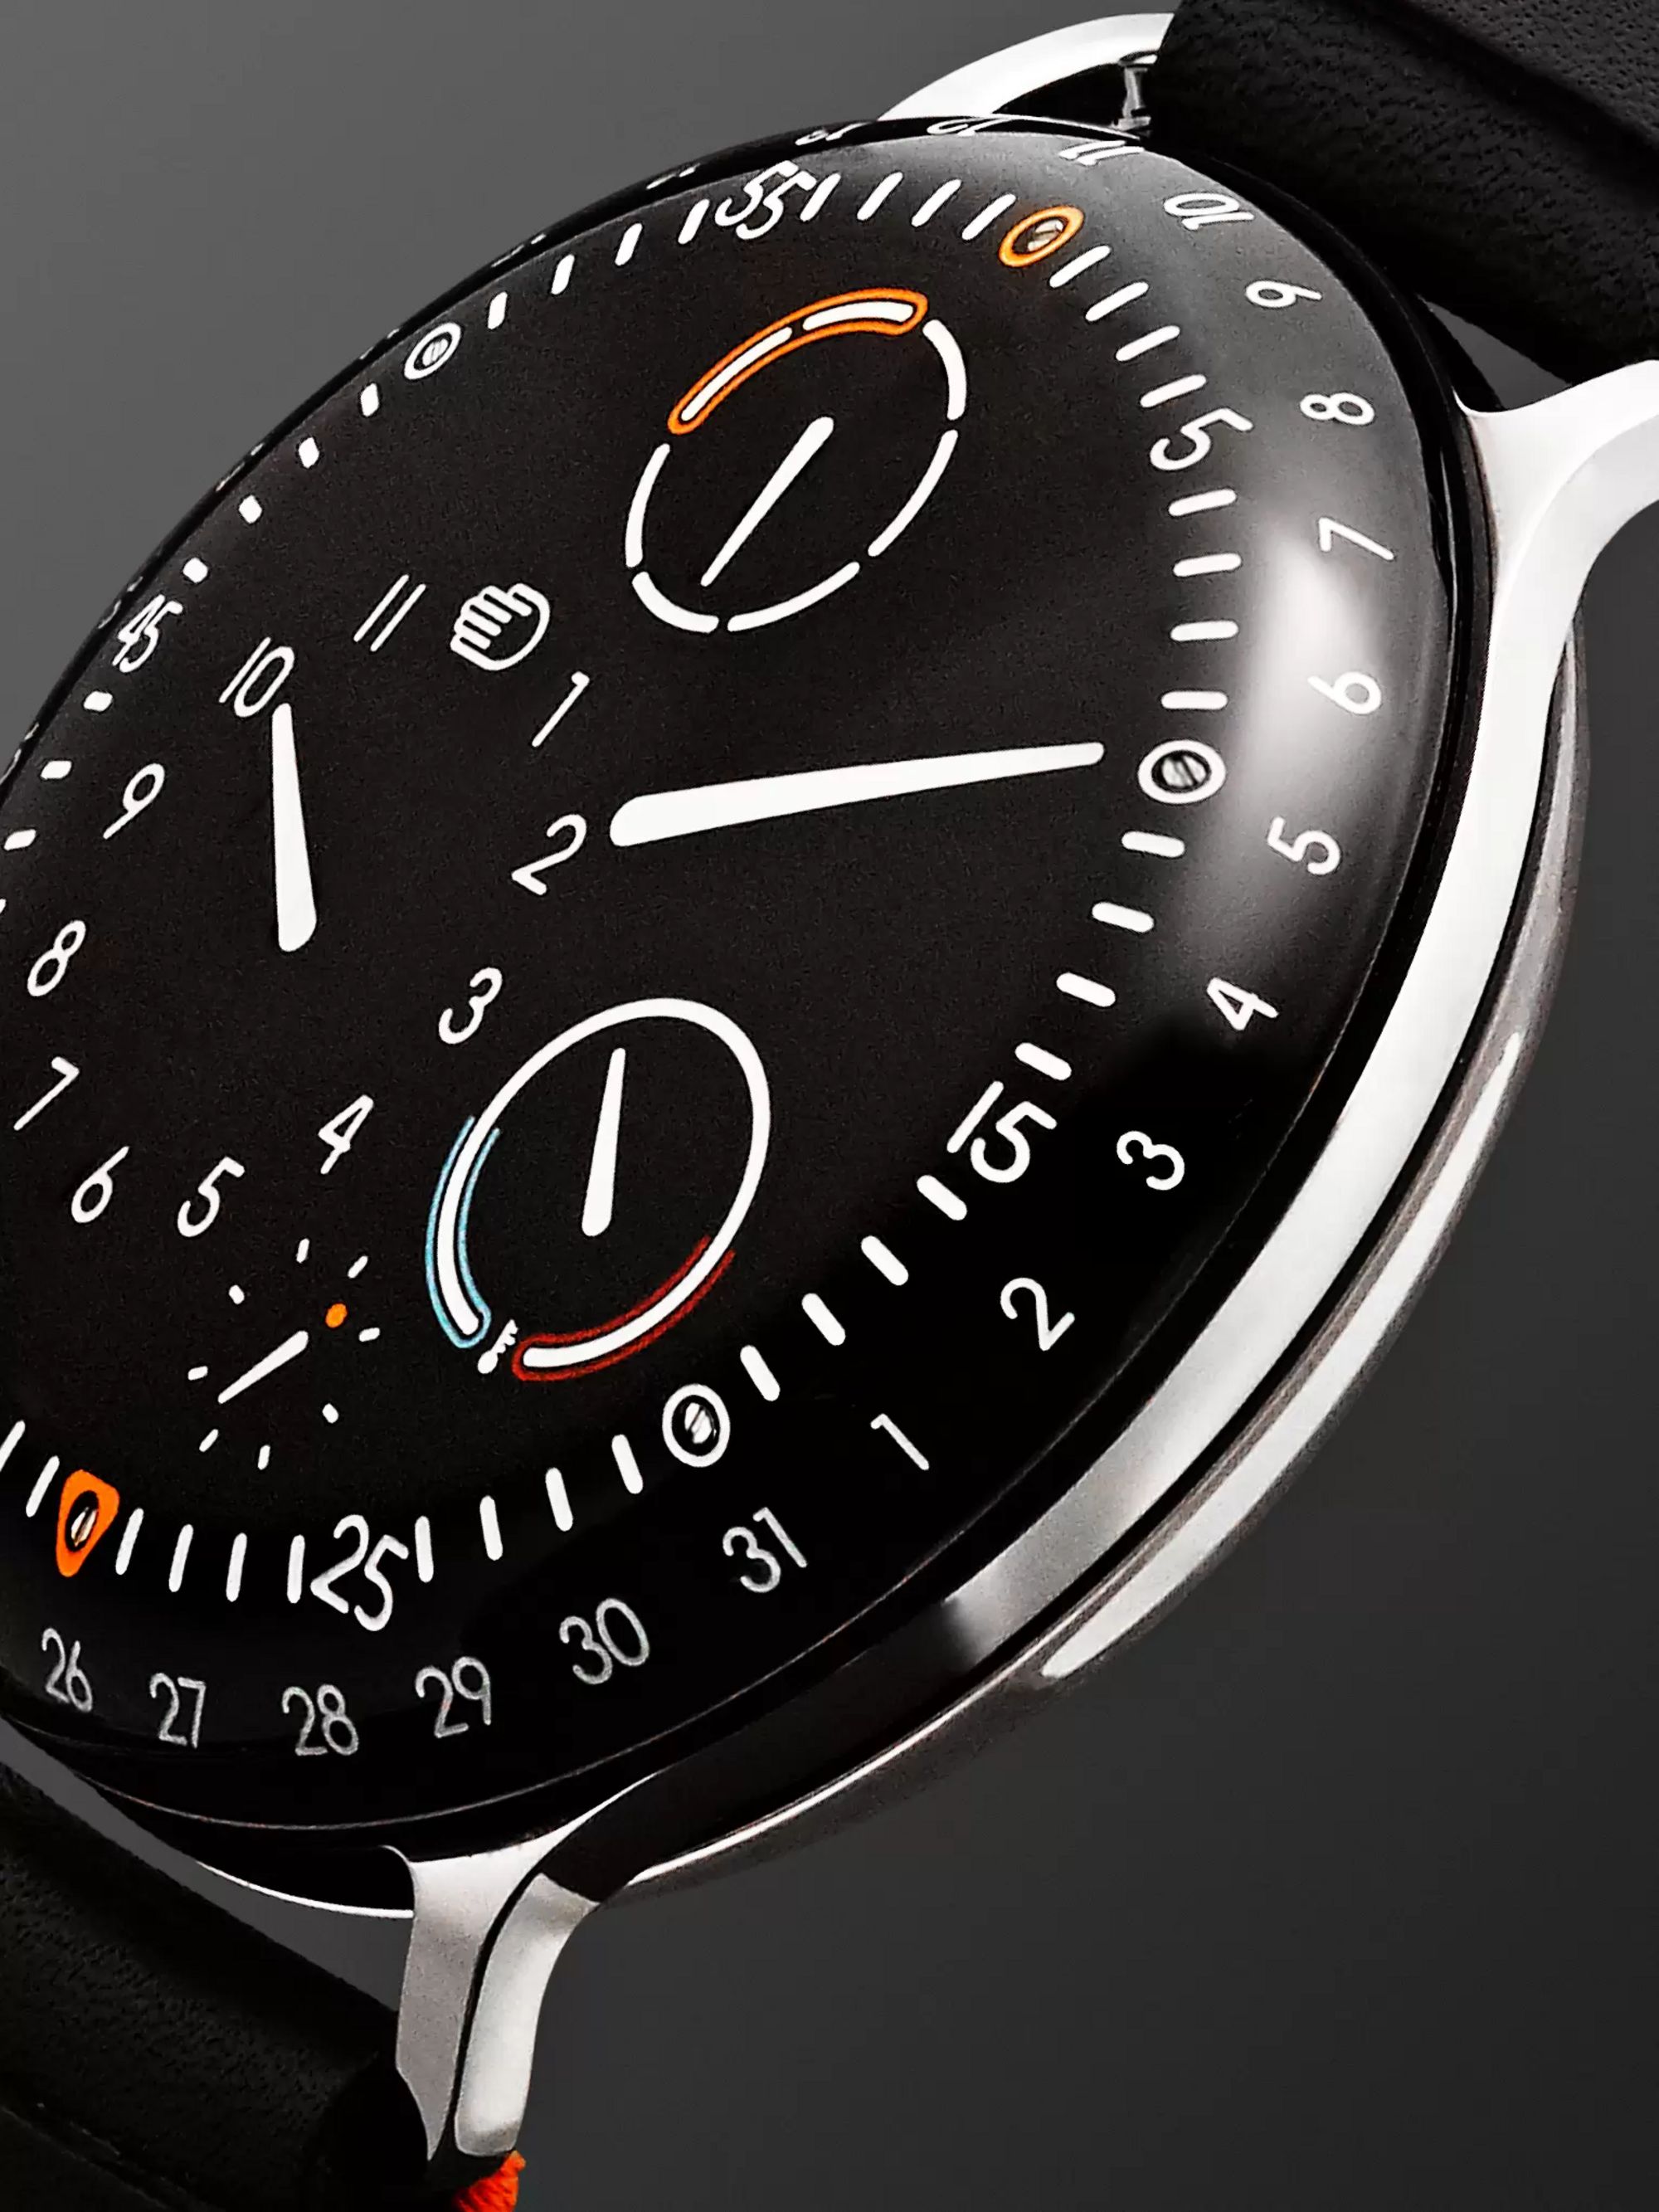 RESSENCE Type 3 Automatic 44mm Titanium and Leather Watch, Ref. No. TYPE 3